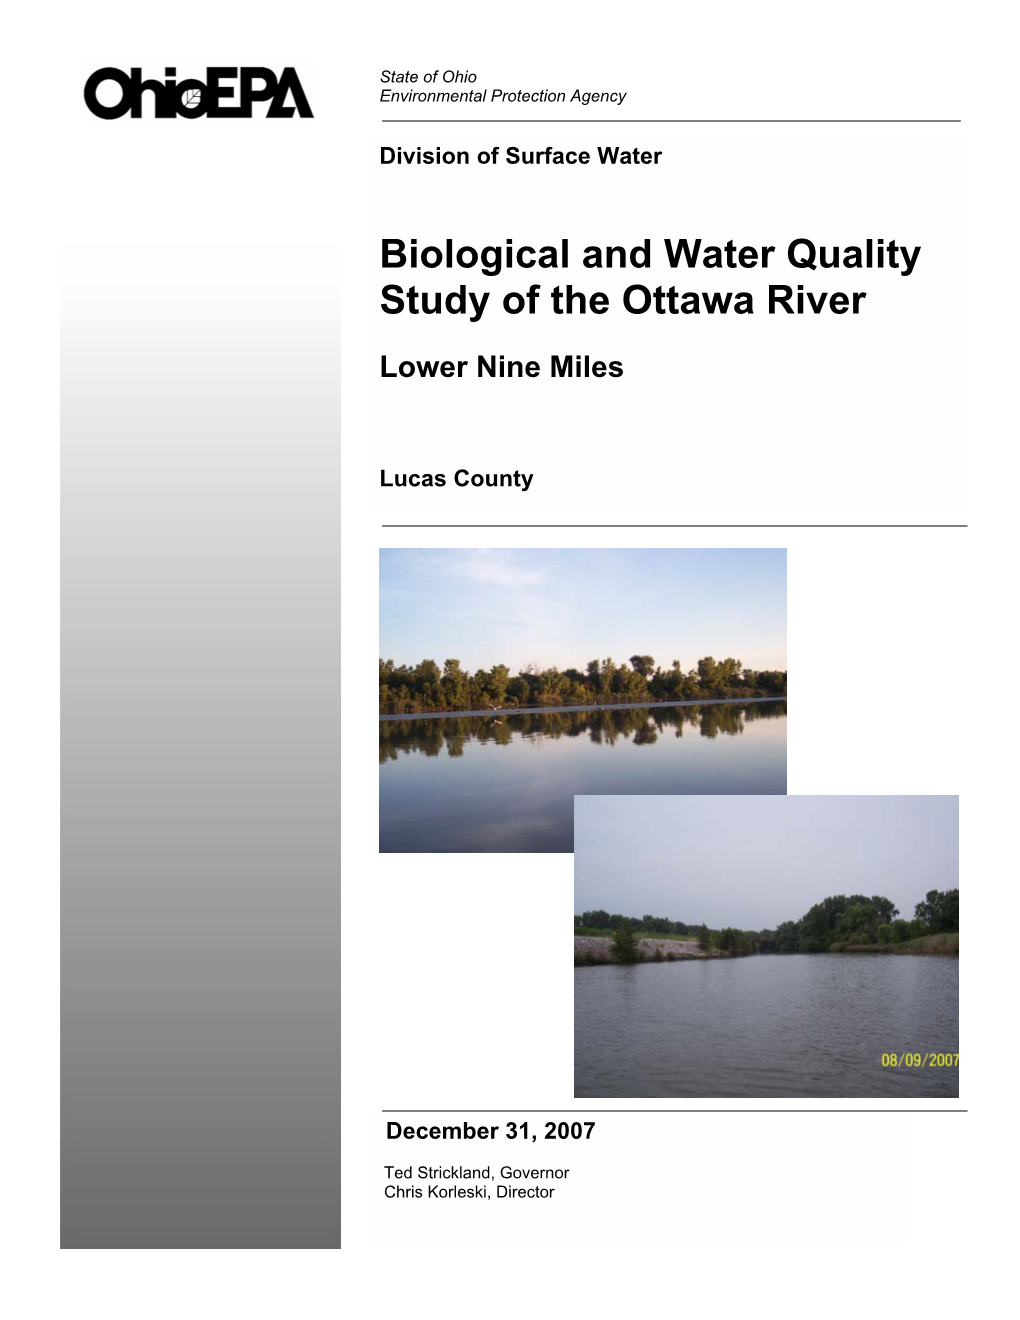 Biological and Water Quality Study of the Ottawa River